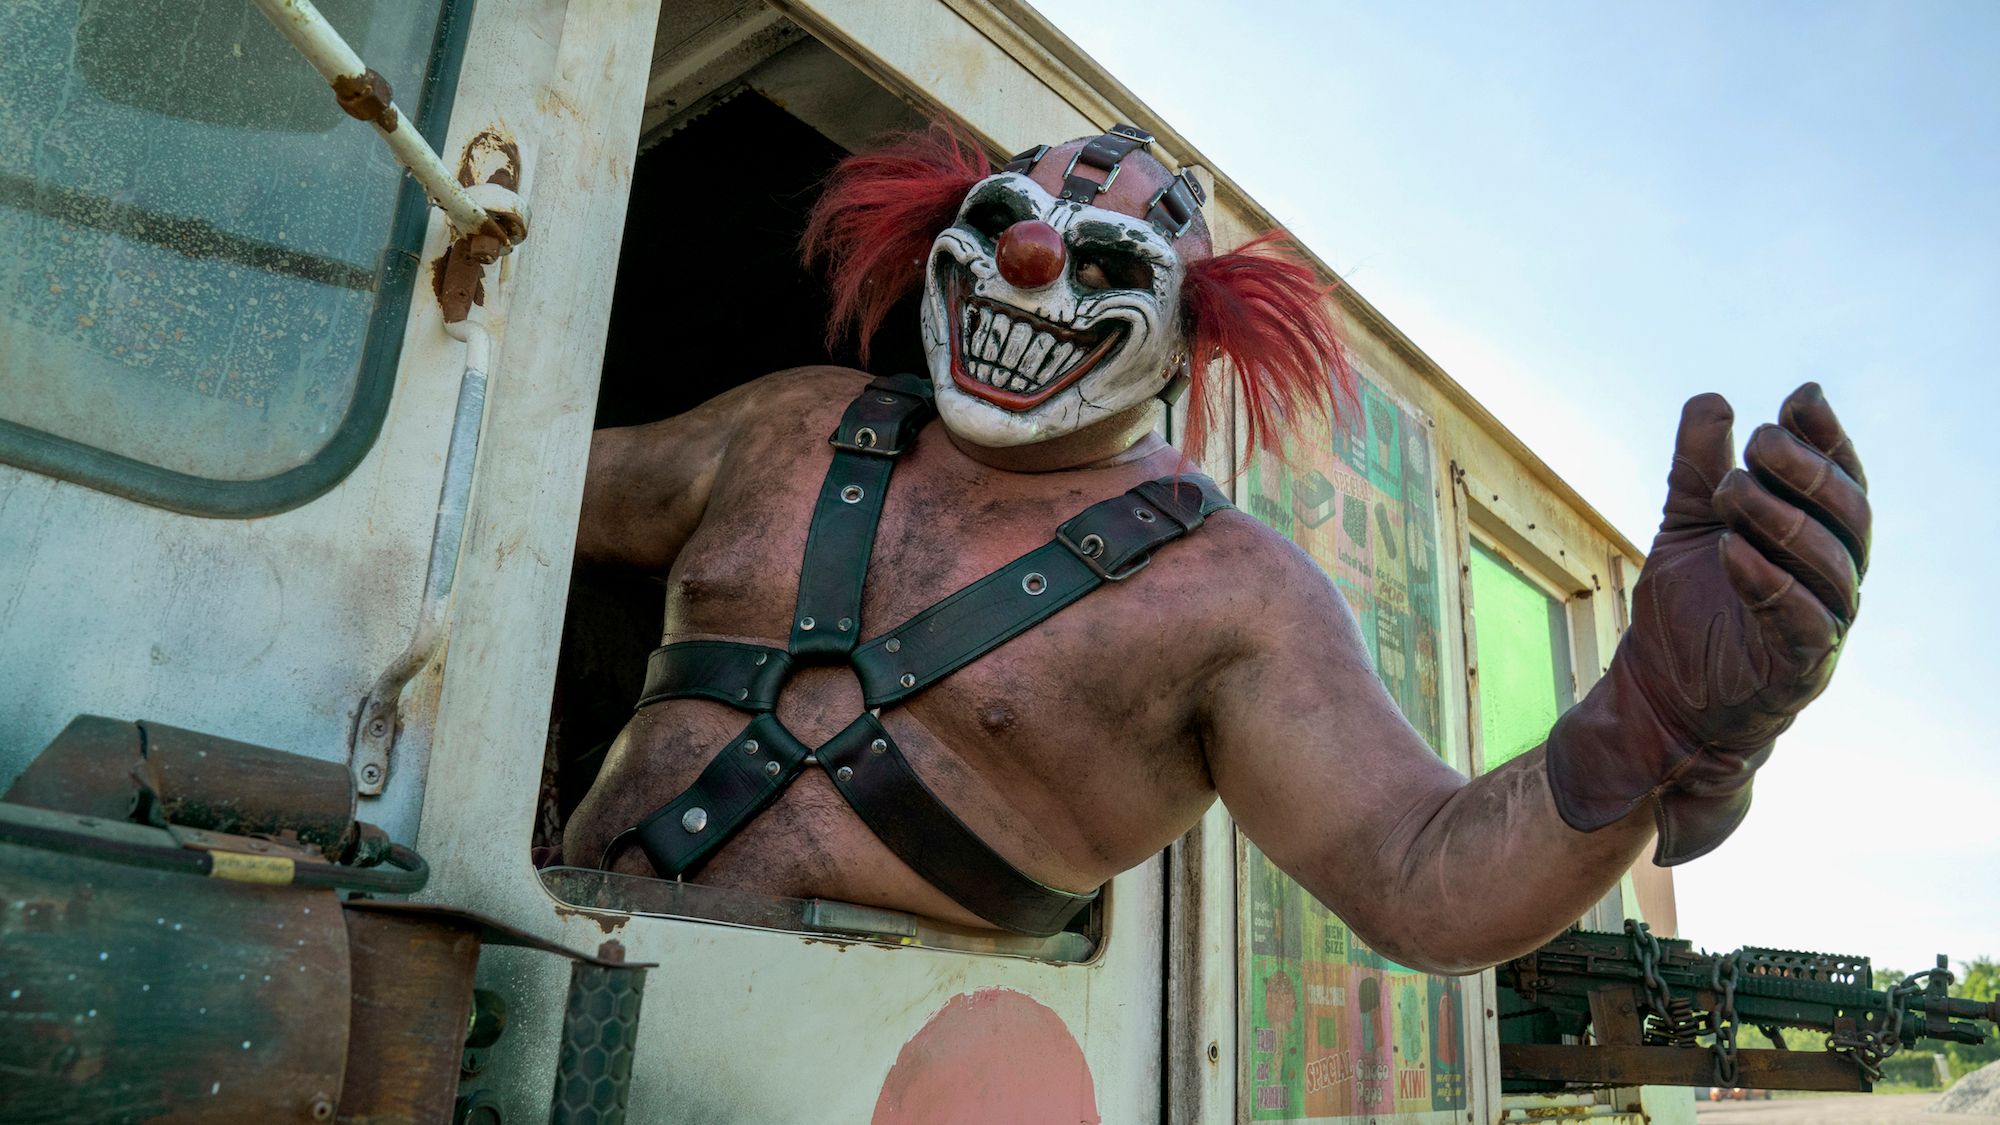 Slideshow: Twisted Metal: The Cast of the Live-Action Series